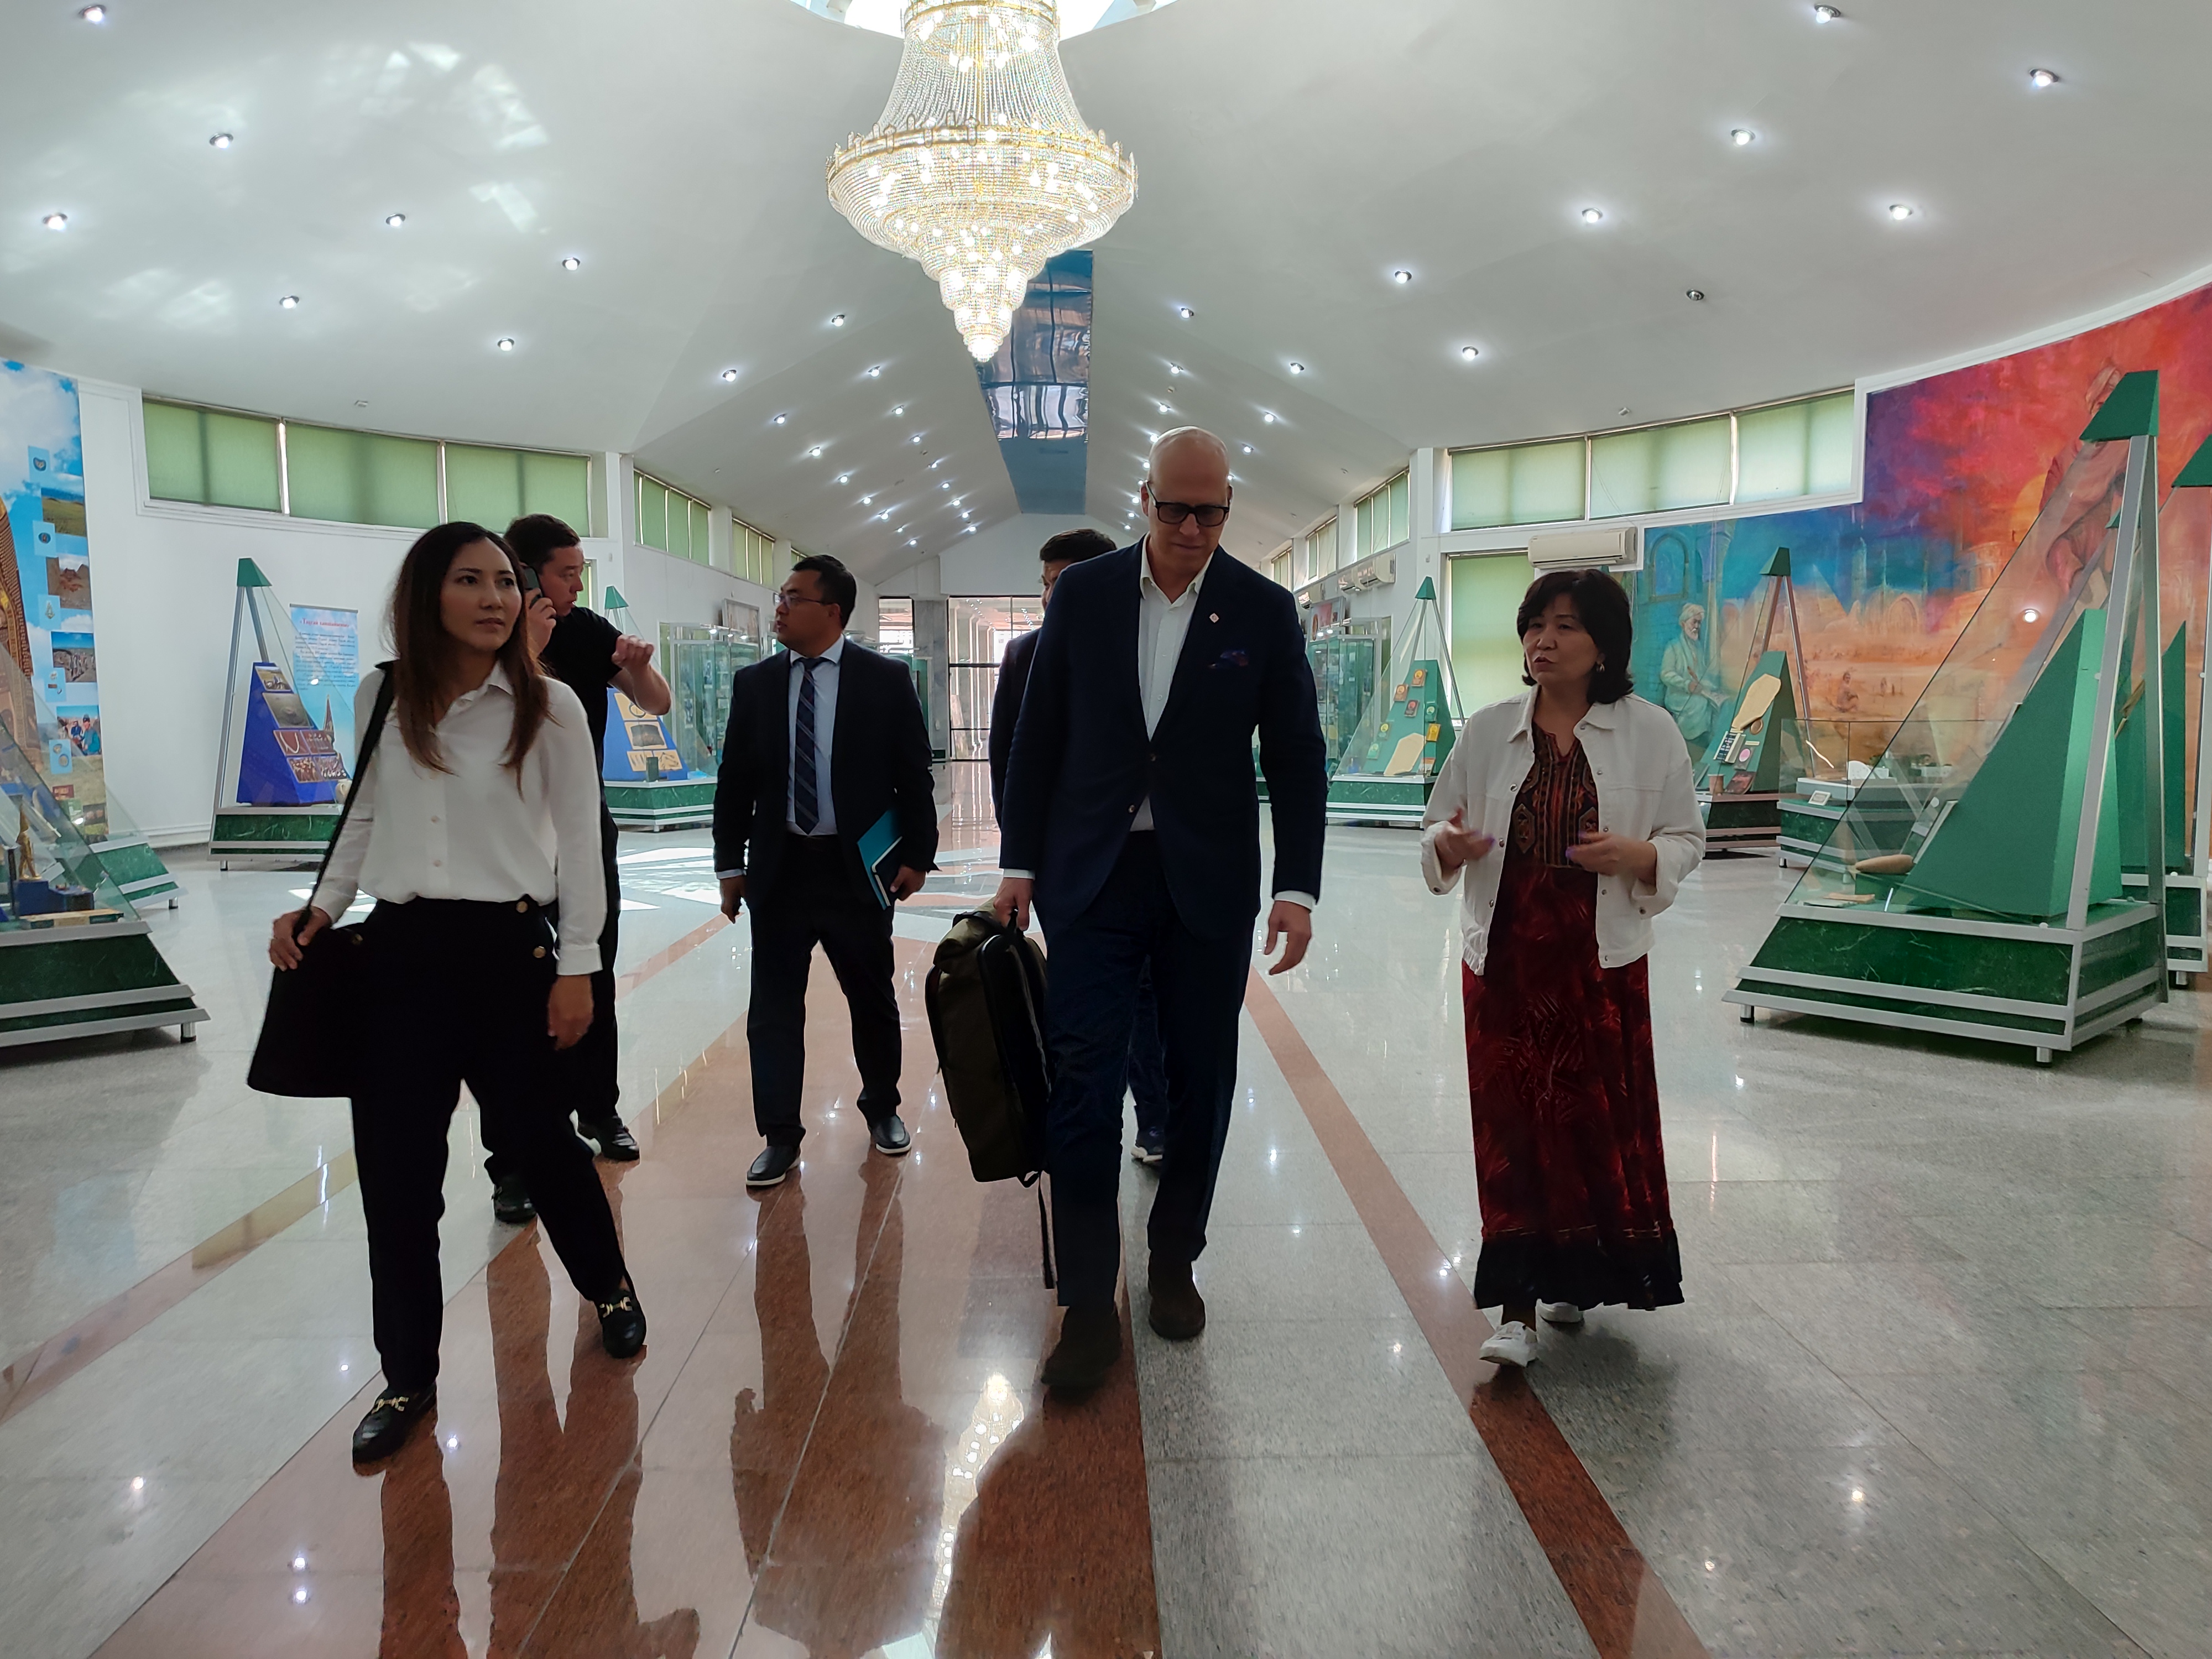 On May 15, the head of Steppe Global Education, Joel Erickson, visited the university museum